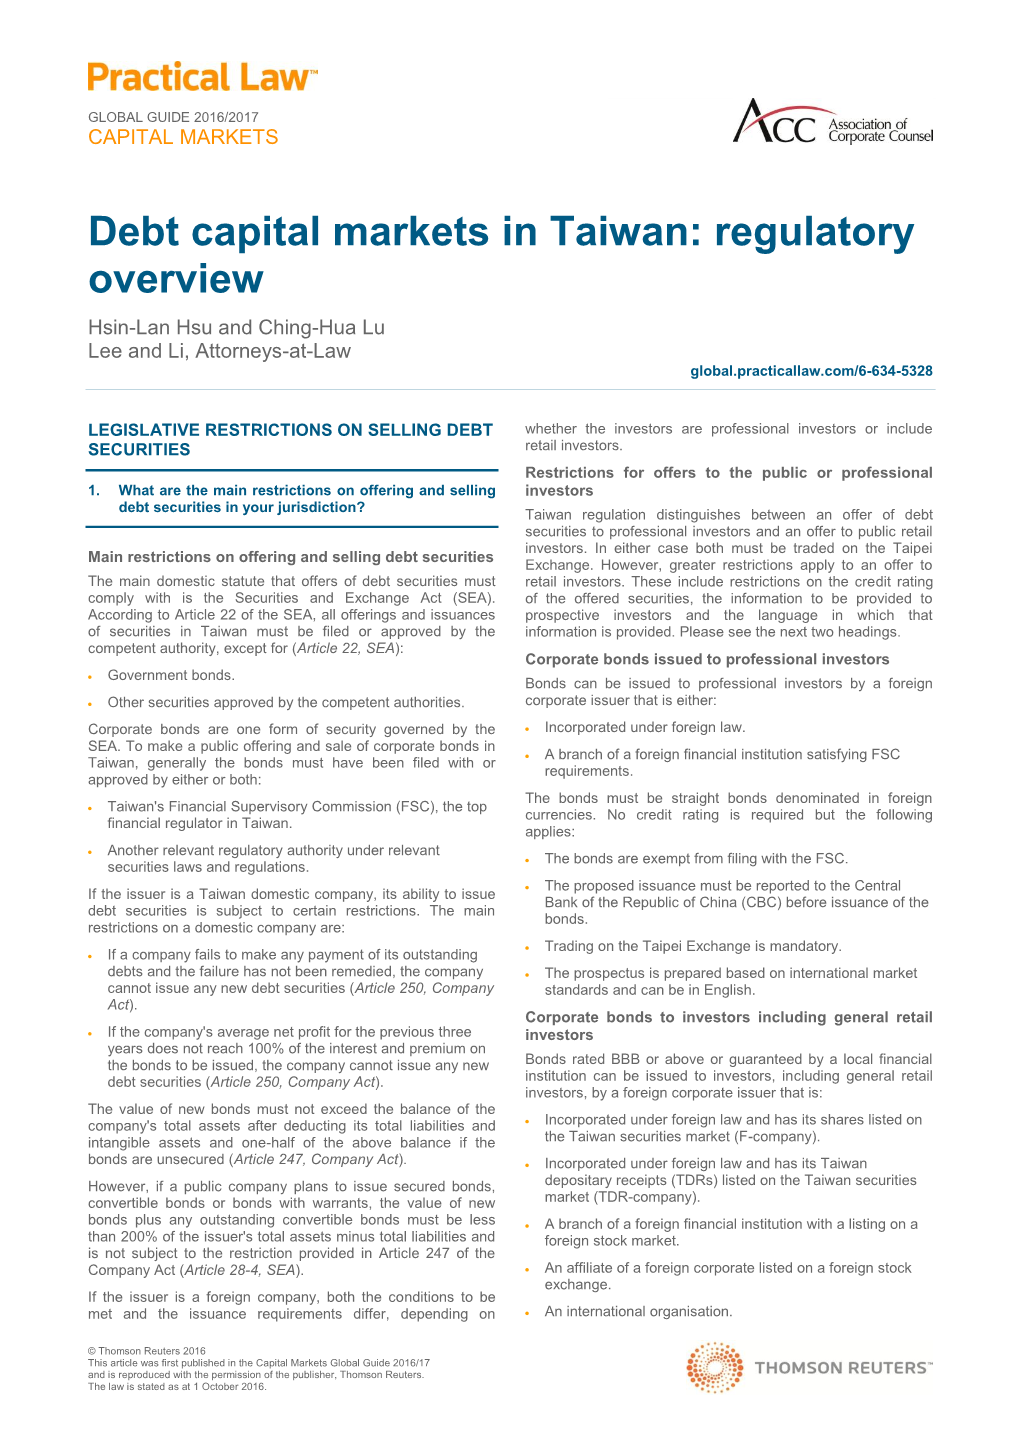 Debt Capital Markets in Taiwan: Regulatory Overview Hsin-Lan Hsu and Ching-Hua Lu Lee and Li, Attorneys-At-Law Global.Practicallaw.Com/6-634-5328